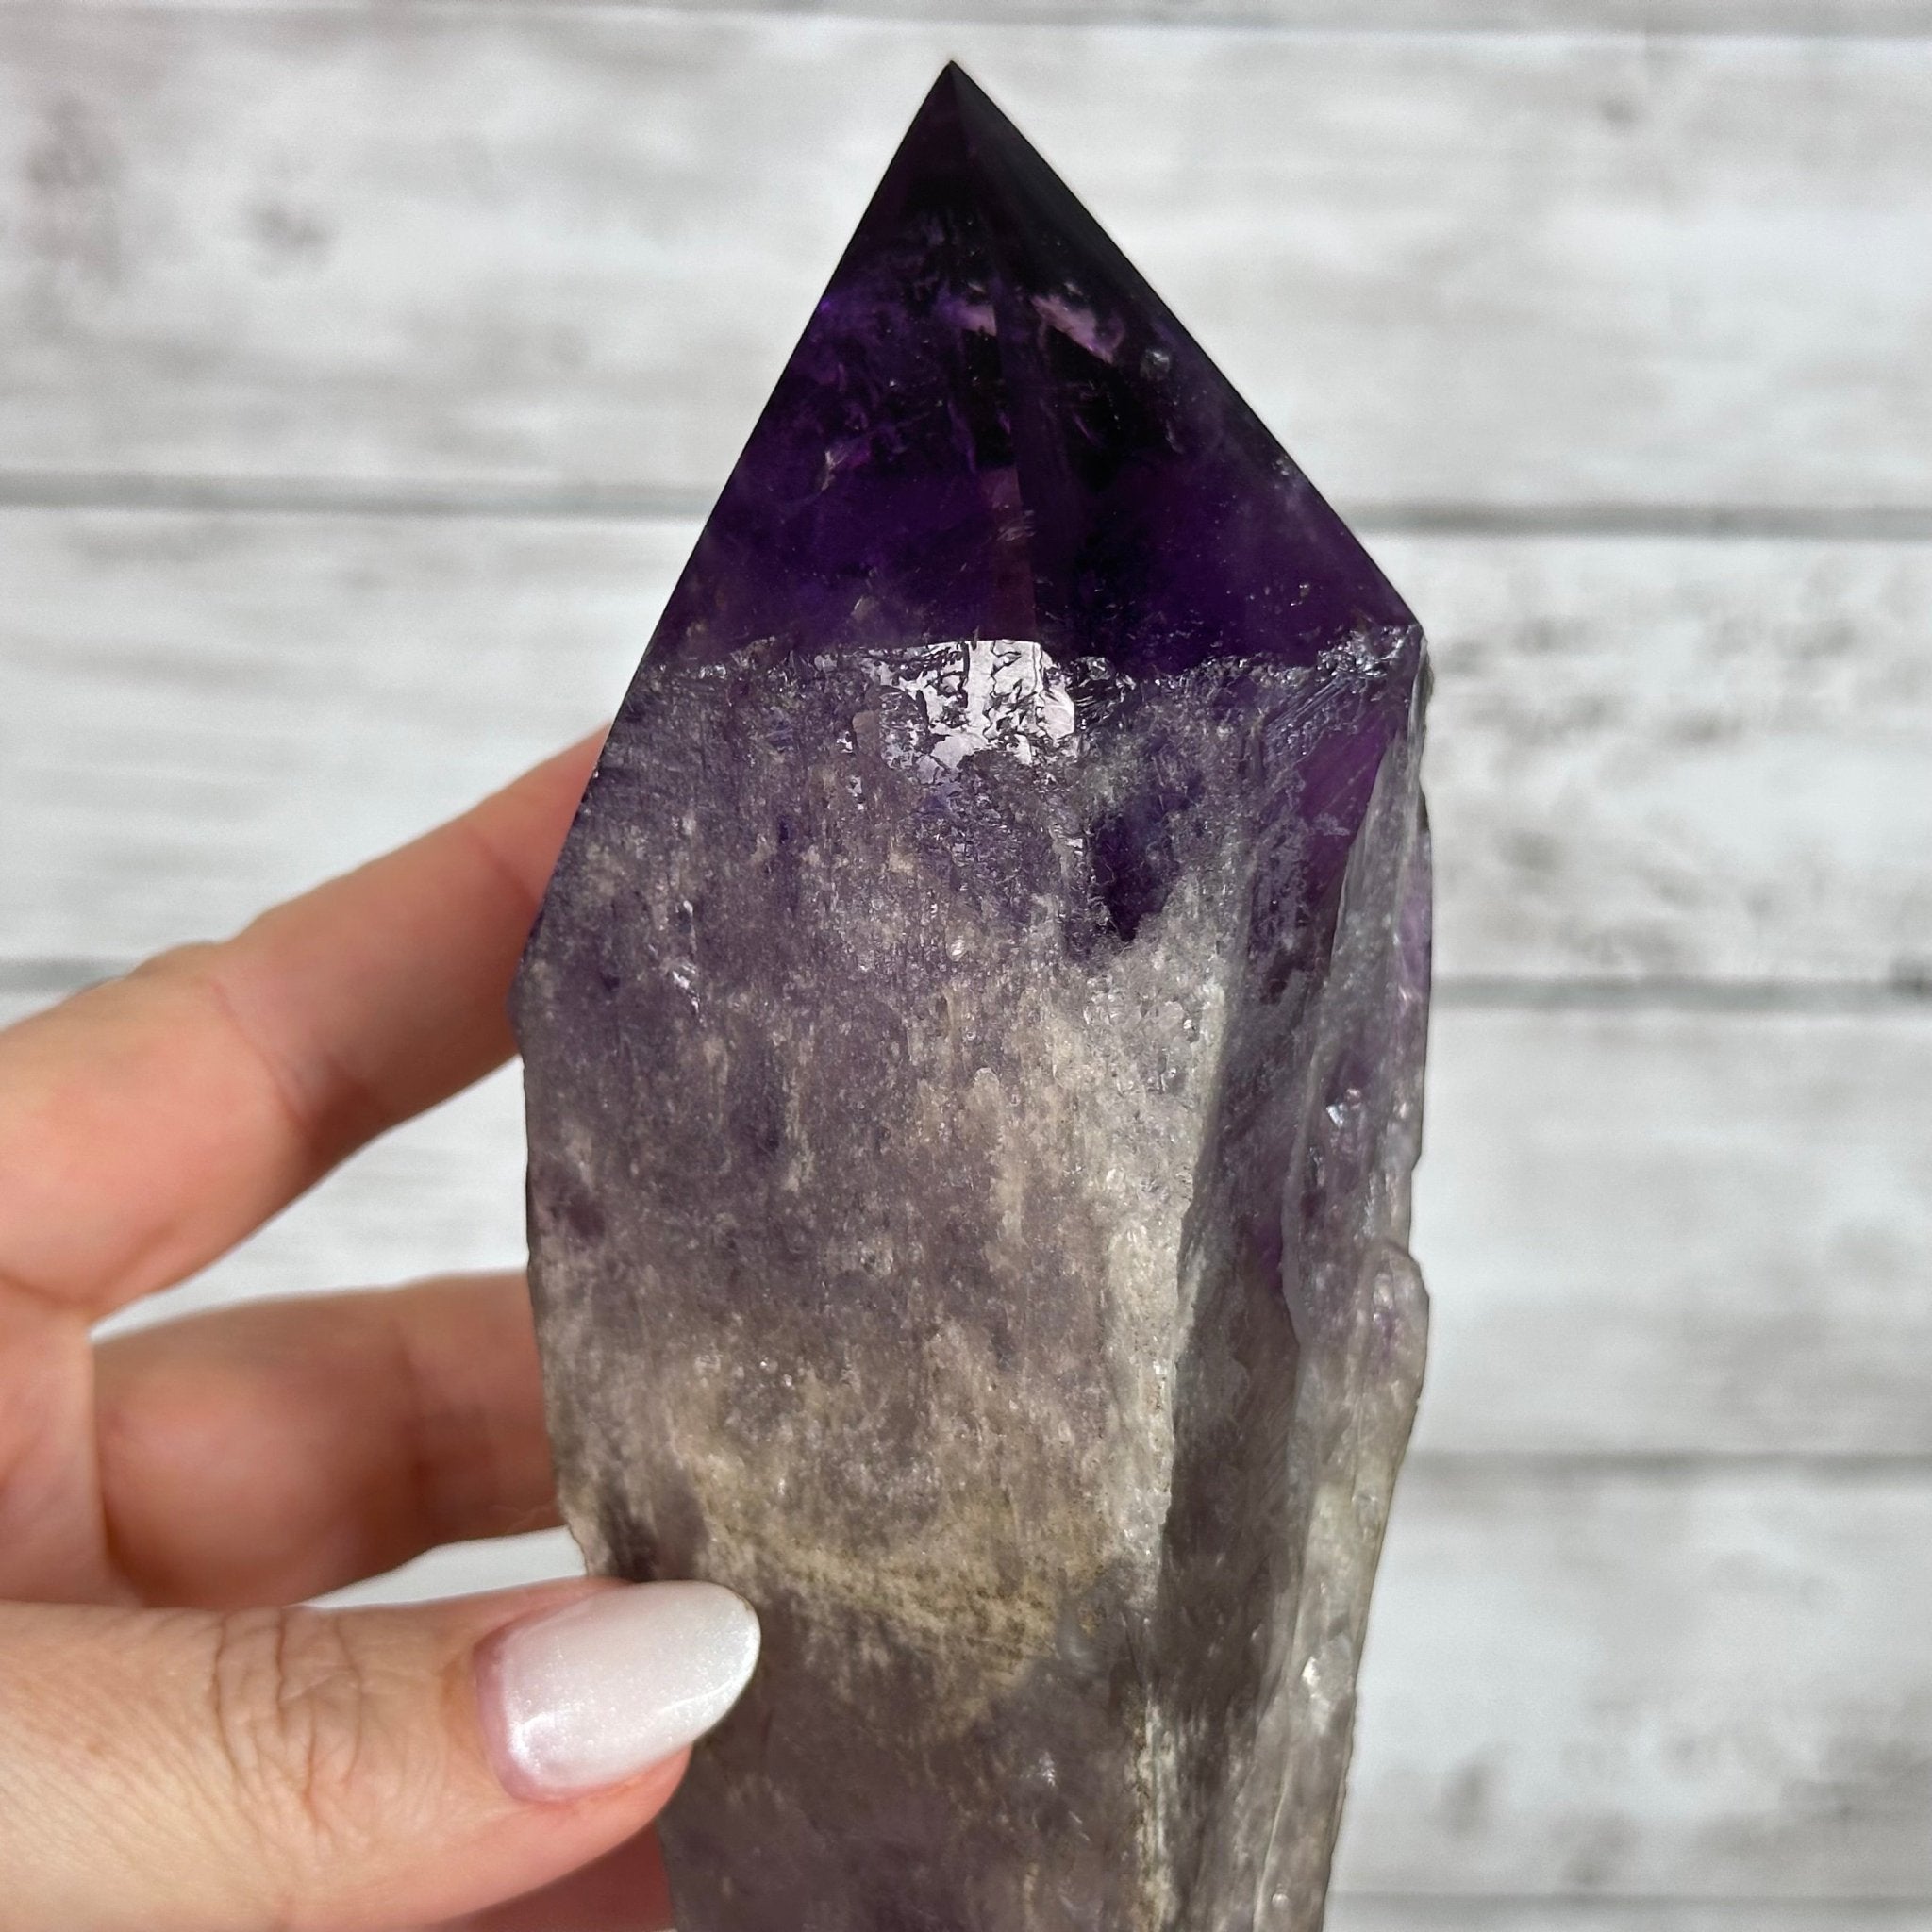 Super Quality Amethyst Wand on a Metal Stand, 2.9 lbs & 15.2" Tall #3123AM-015 - Brazil GemsBrazil GemsSuper Quality Amethyst Wand on a Metal Stand, 2.9 lbs & 15.2" Tall #3123AM-015Clusters on Fixed Bases3123AM-015